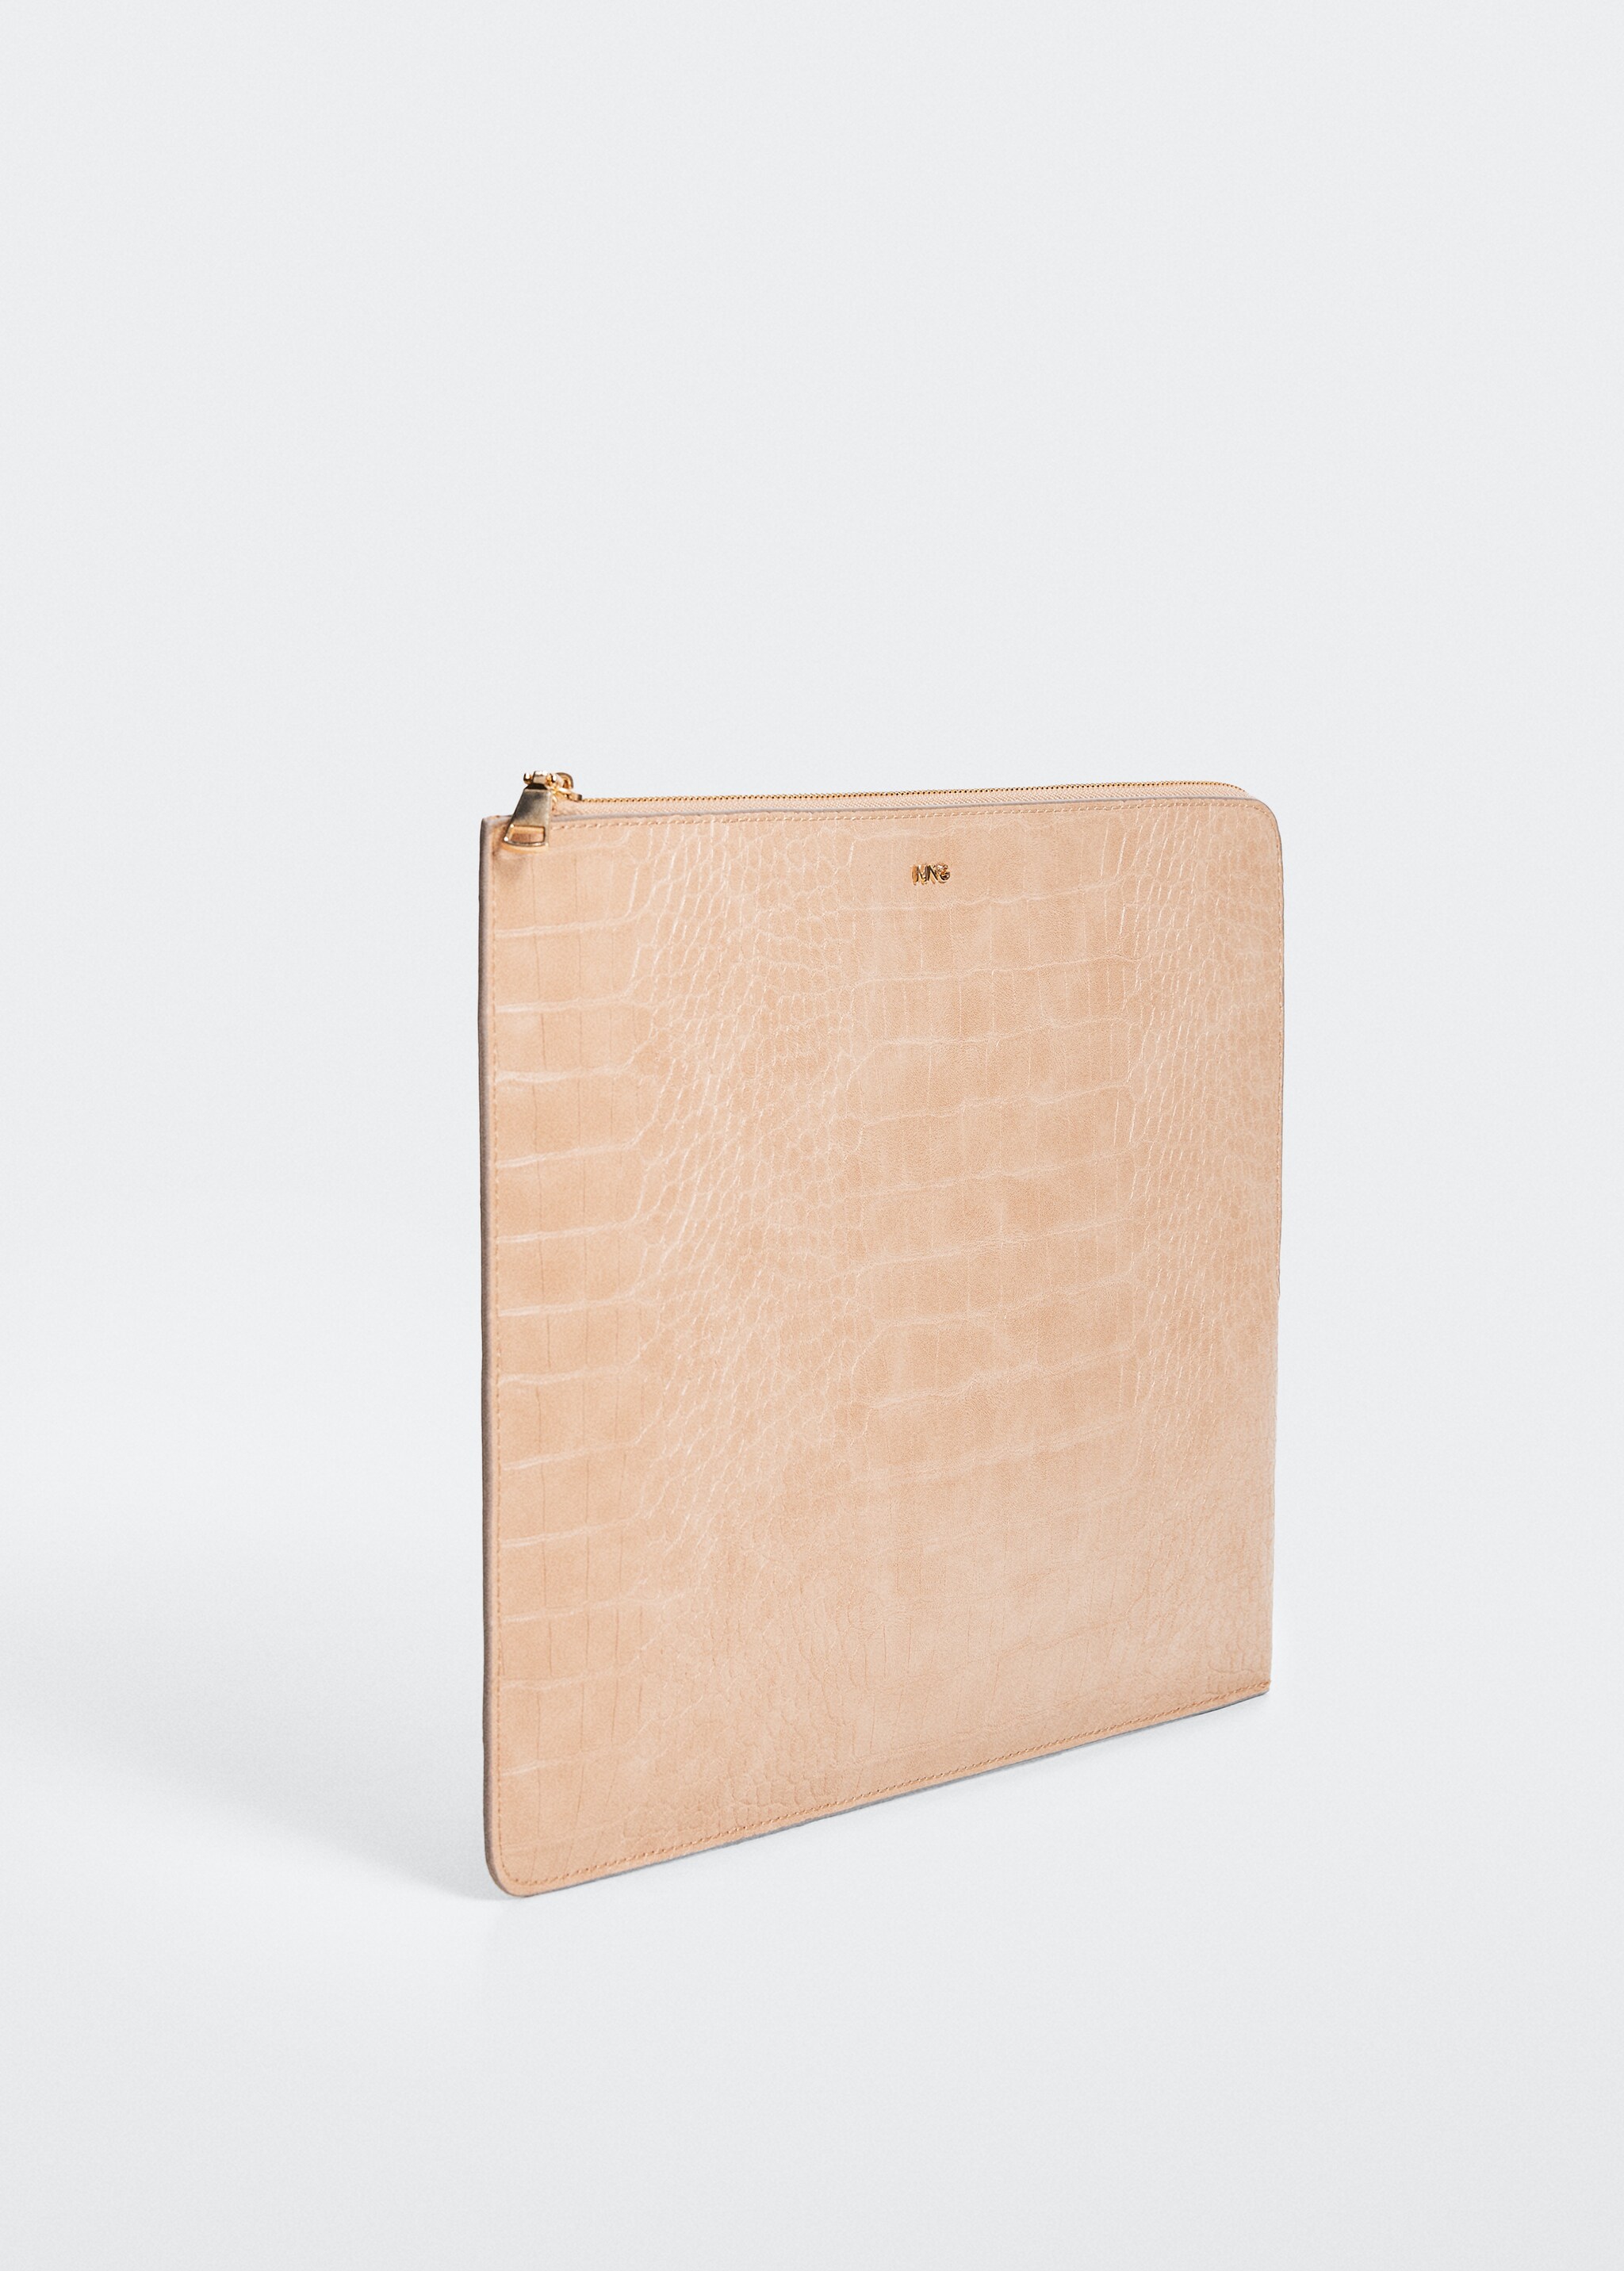 Coco laptop case - Details of the article 3